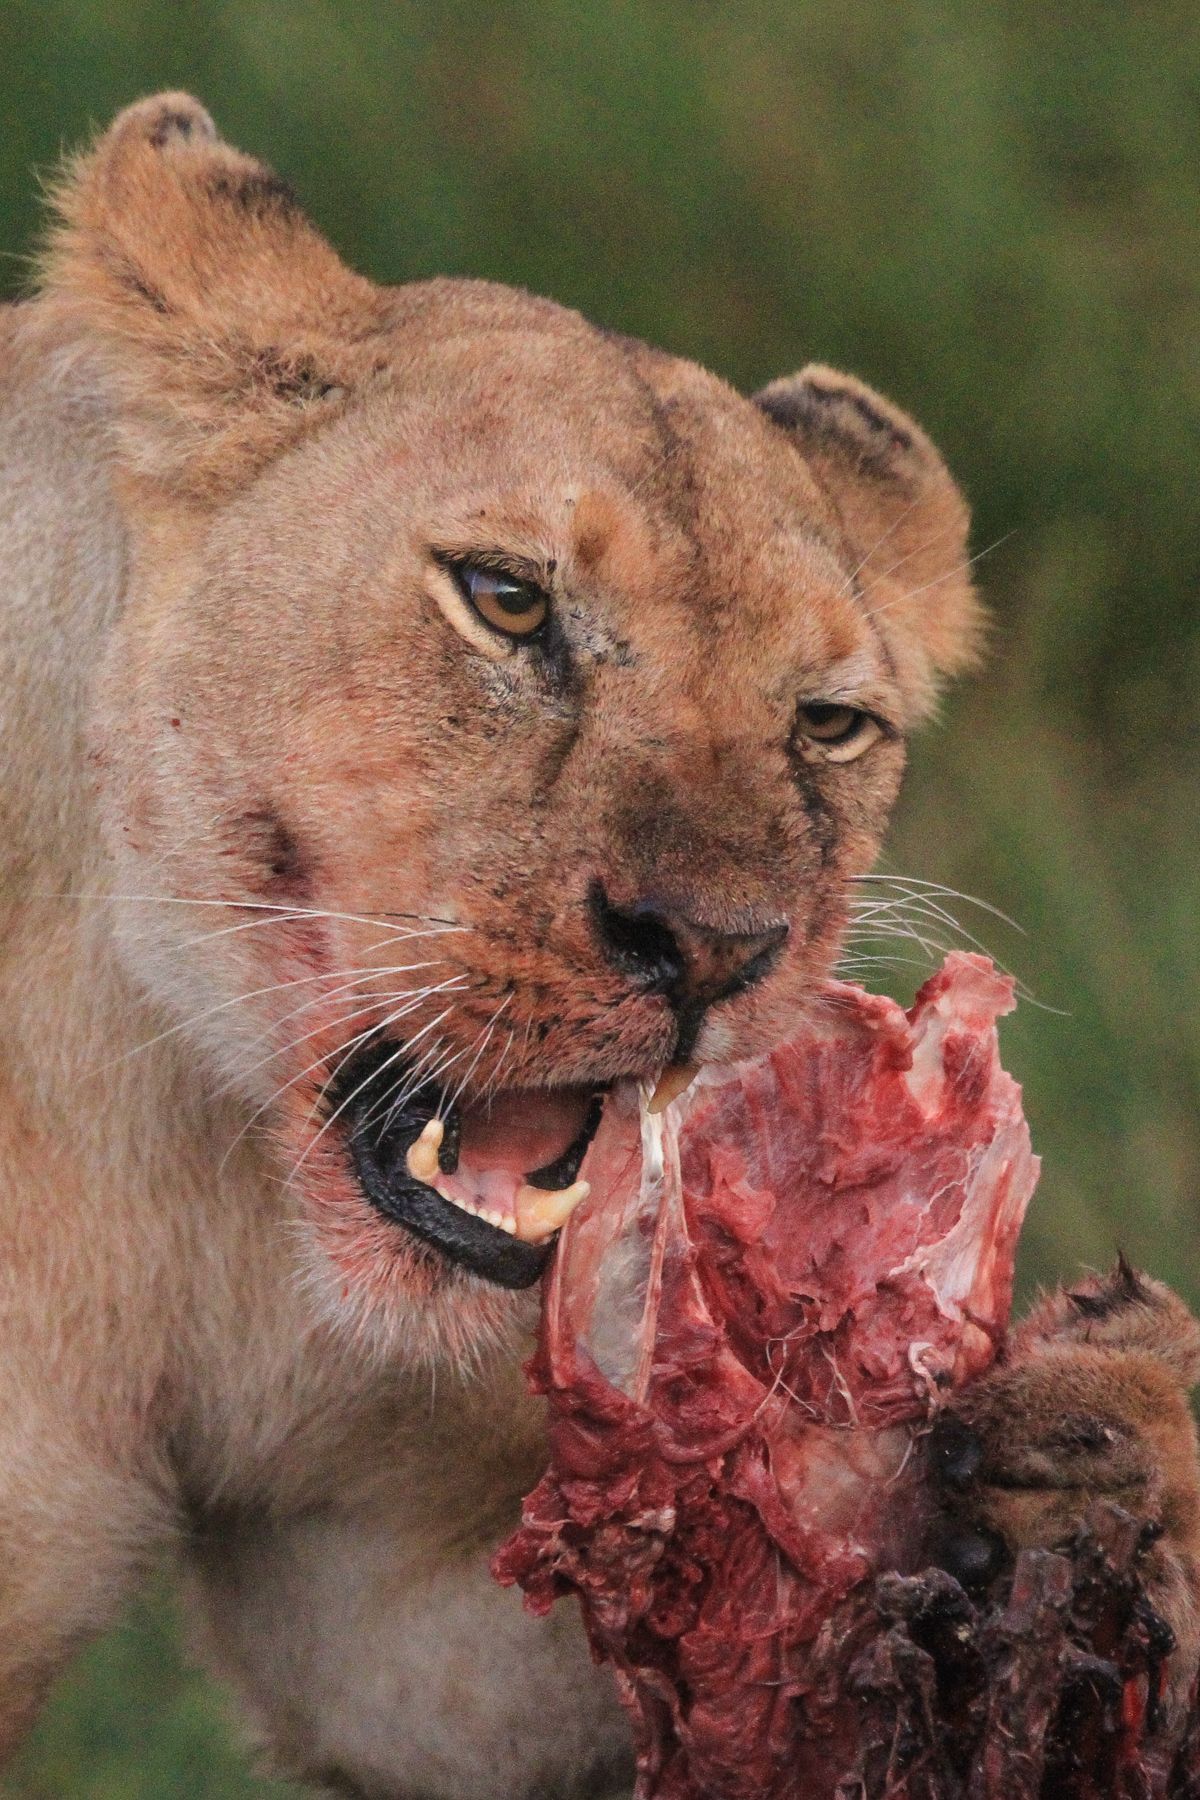 When it comes to hunting, the female Lions do most of the work